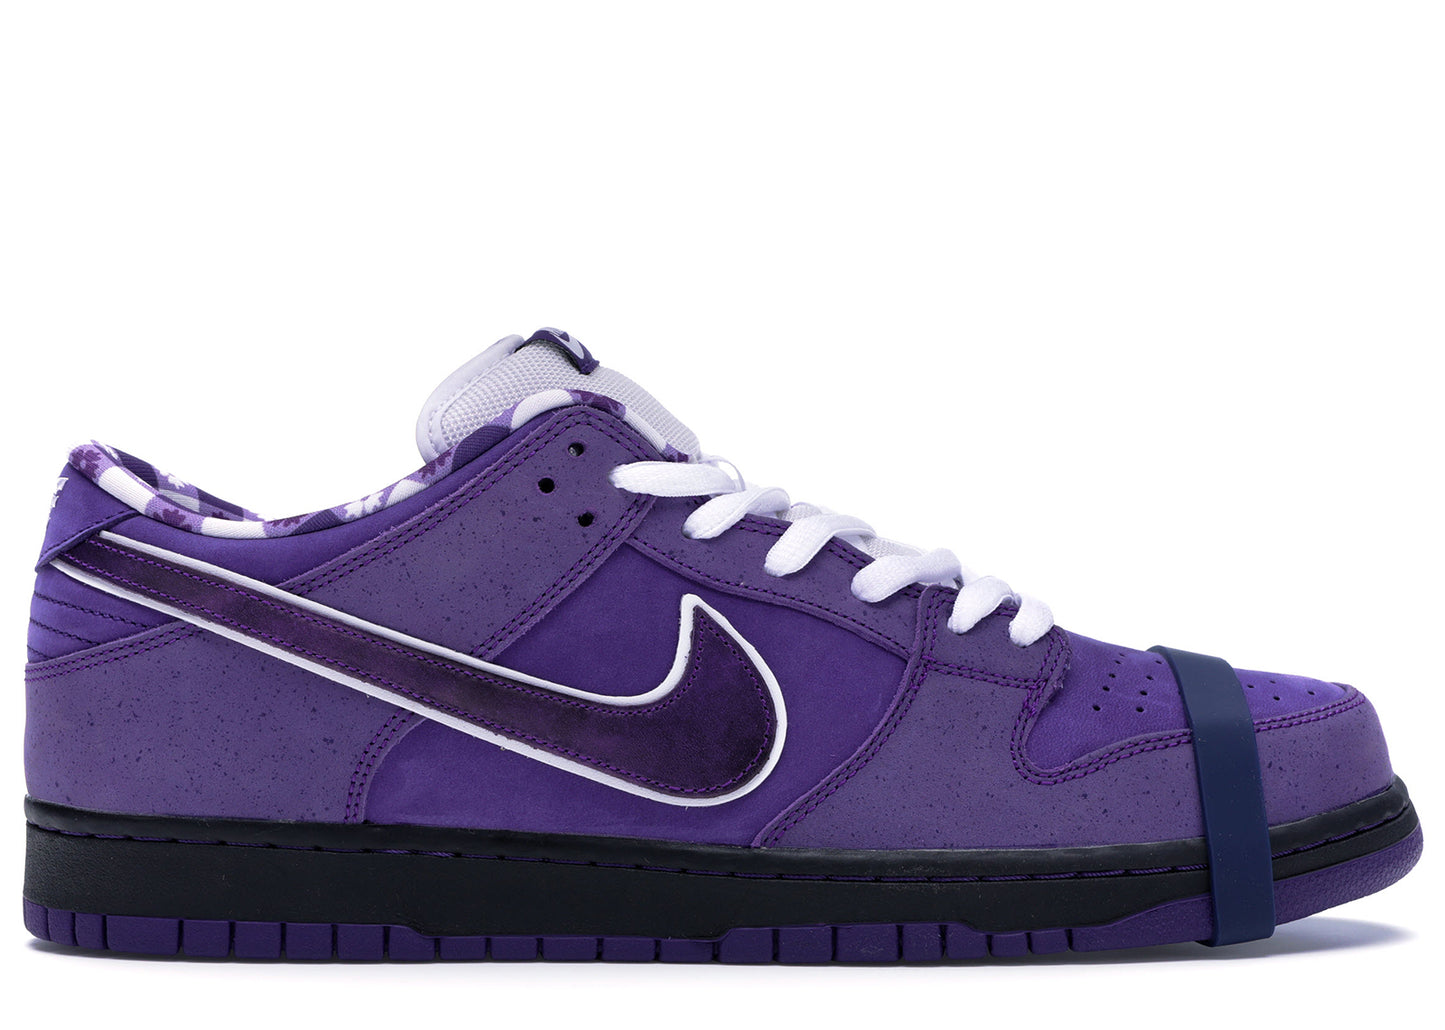 Nike SB Dunk Low 'Concepts - Purple Lobster'